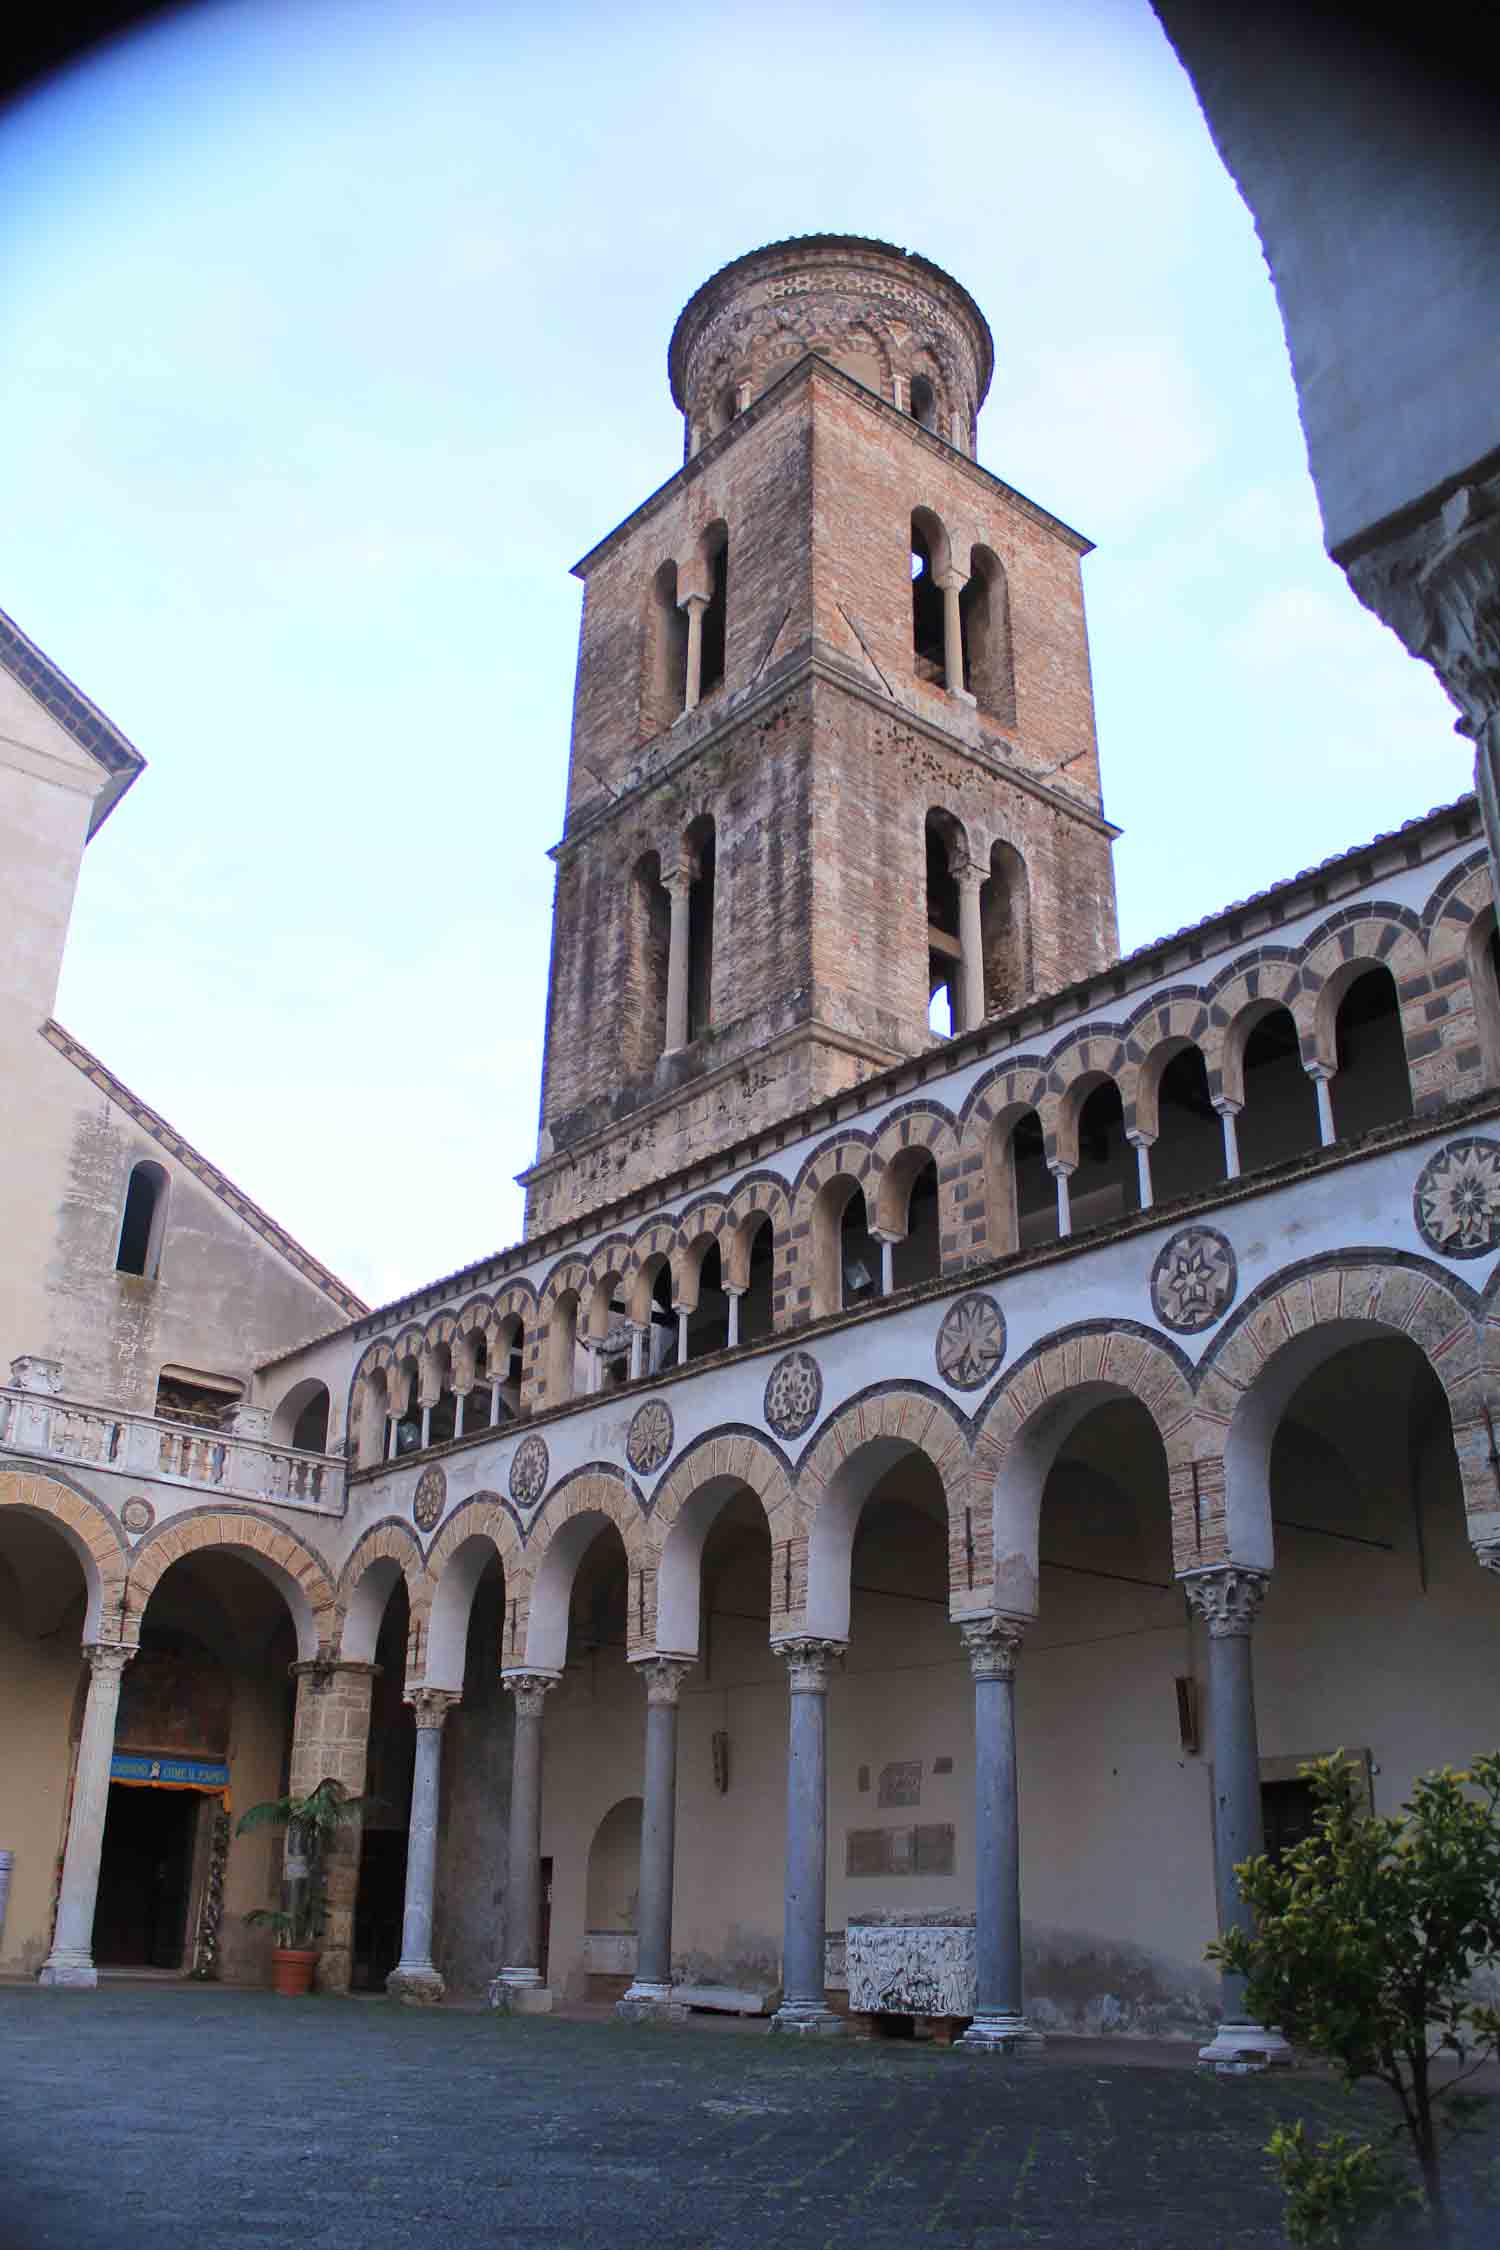 Courtyard of Cathedral of Salerno